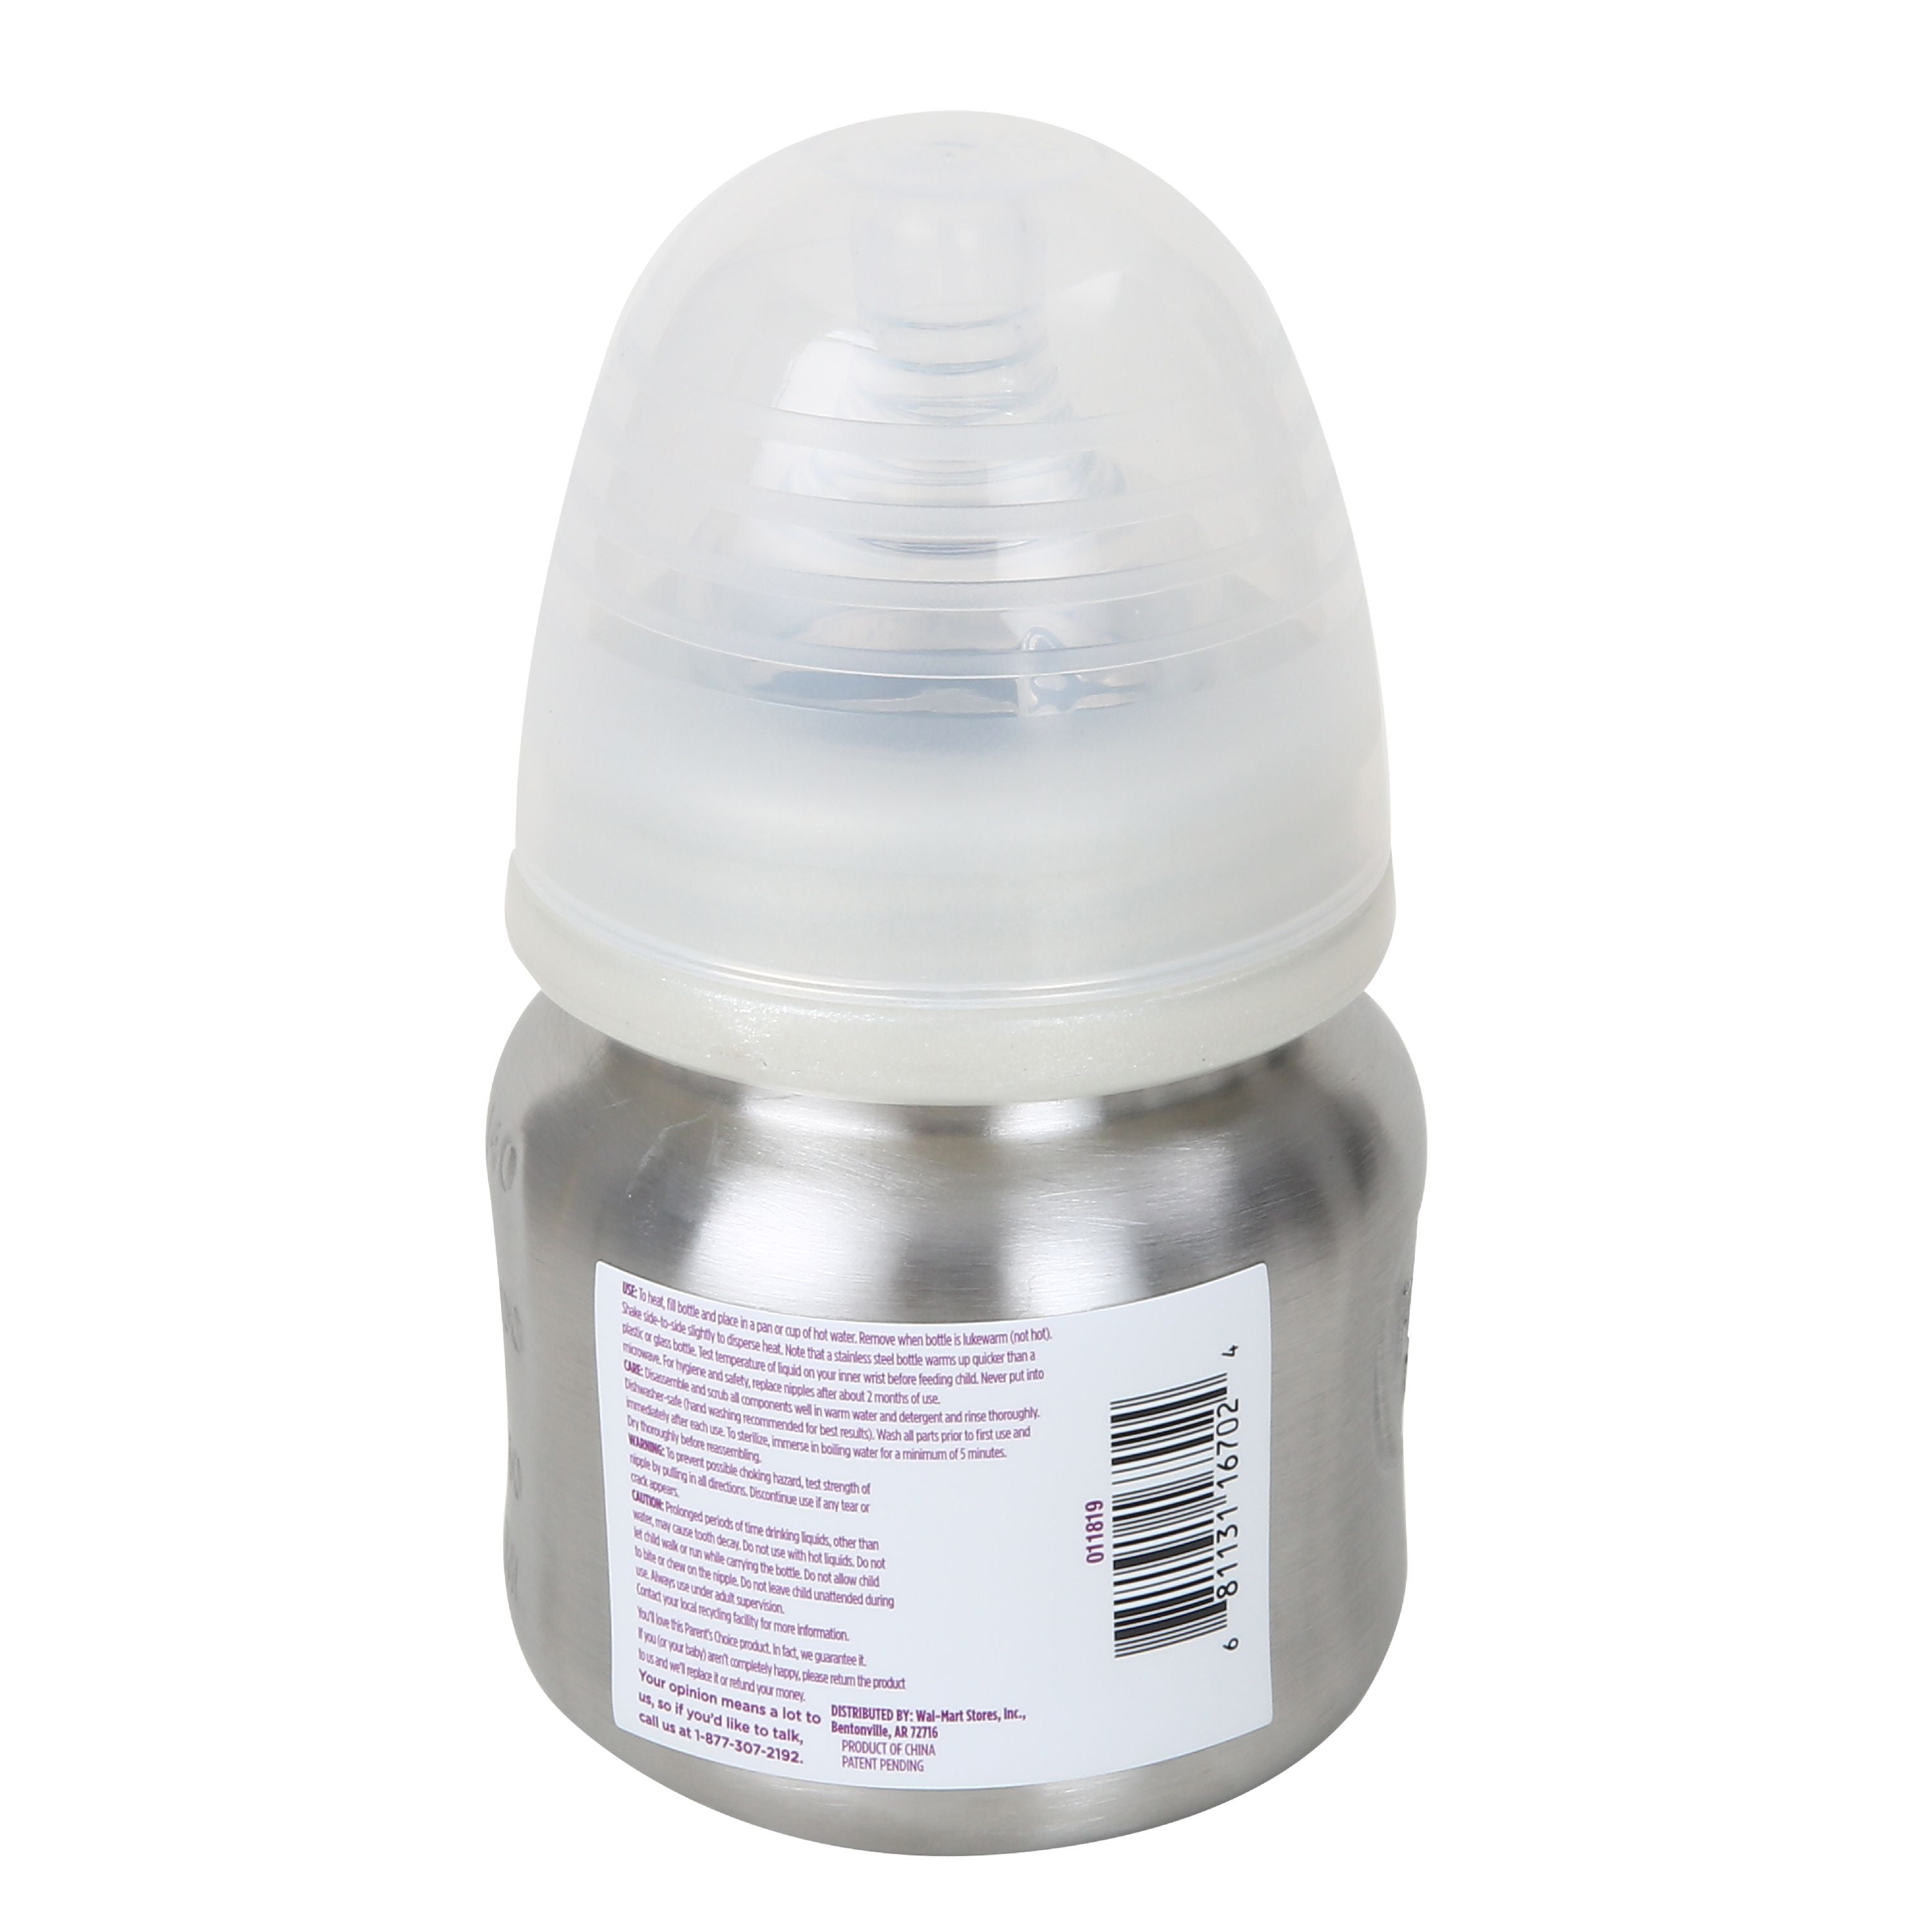 Parent's Choice 5oz Stainless Steel Wide Neck Baby Bottle, Stage